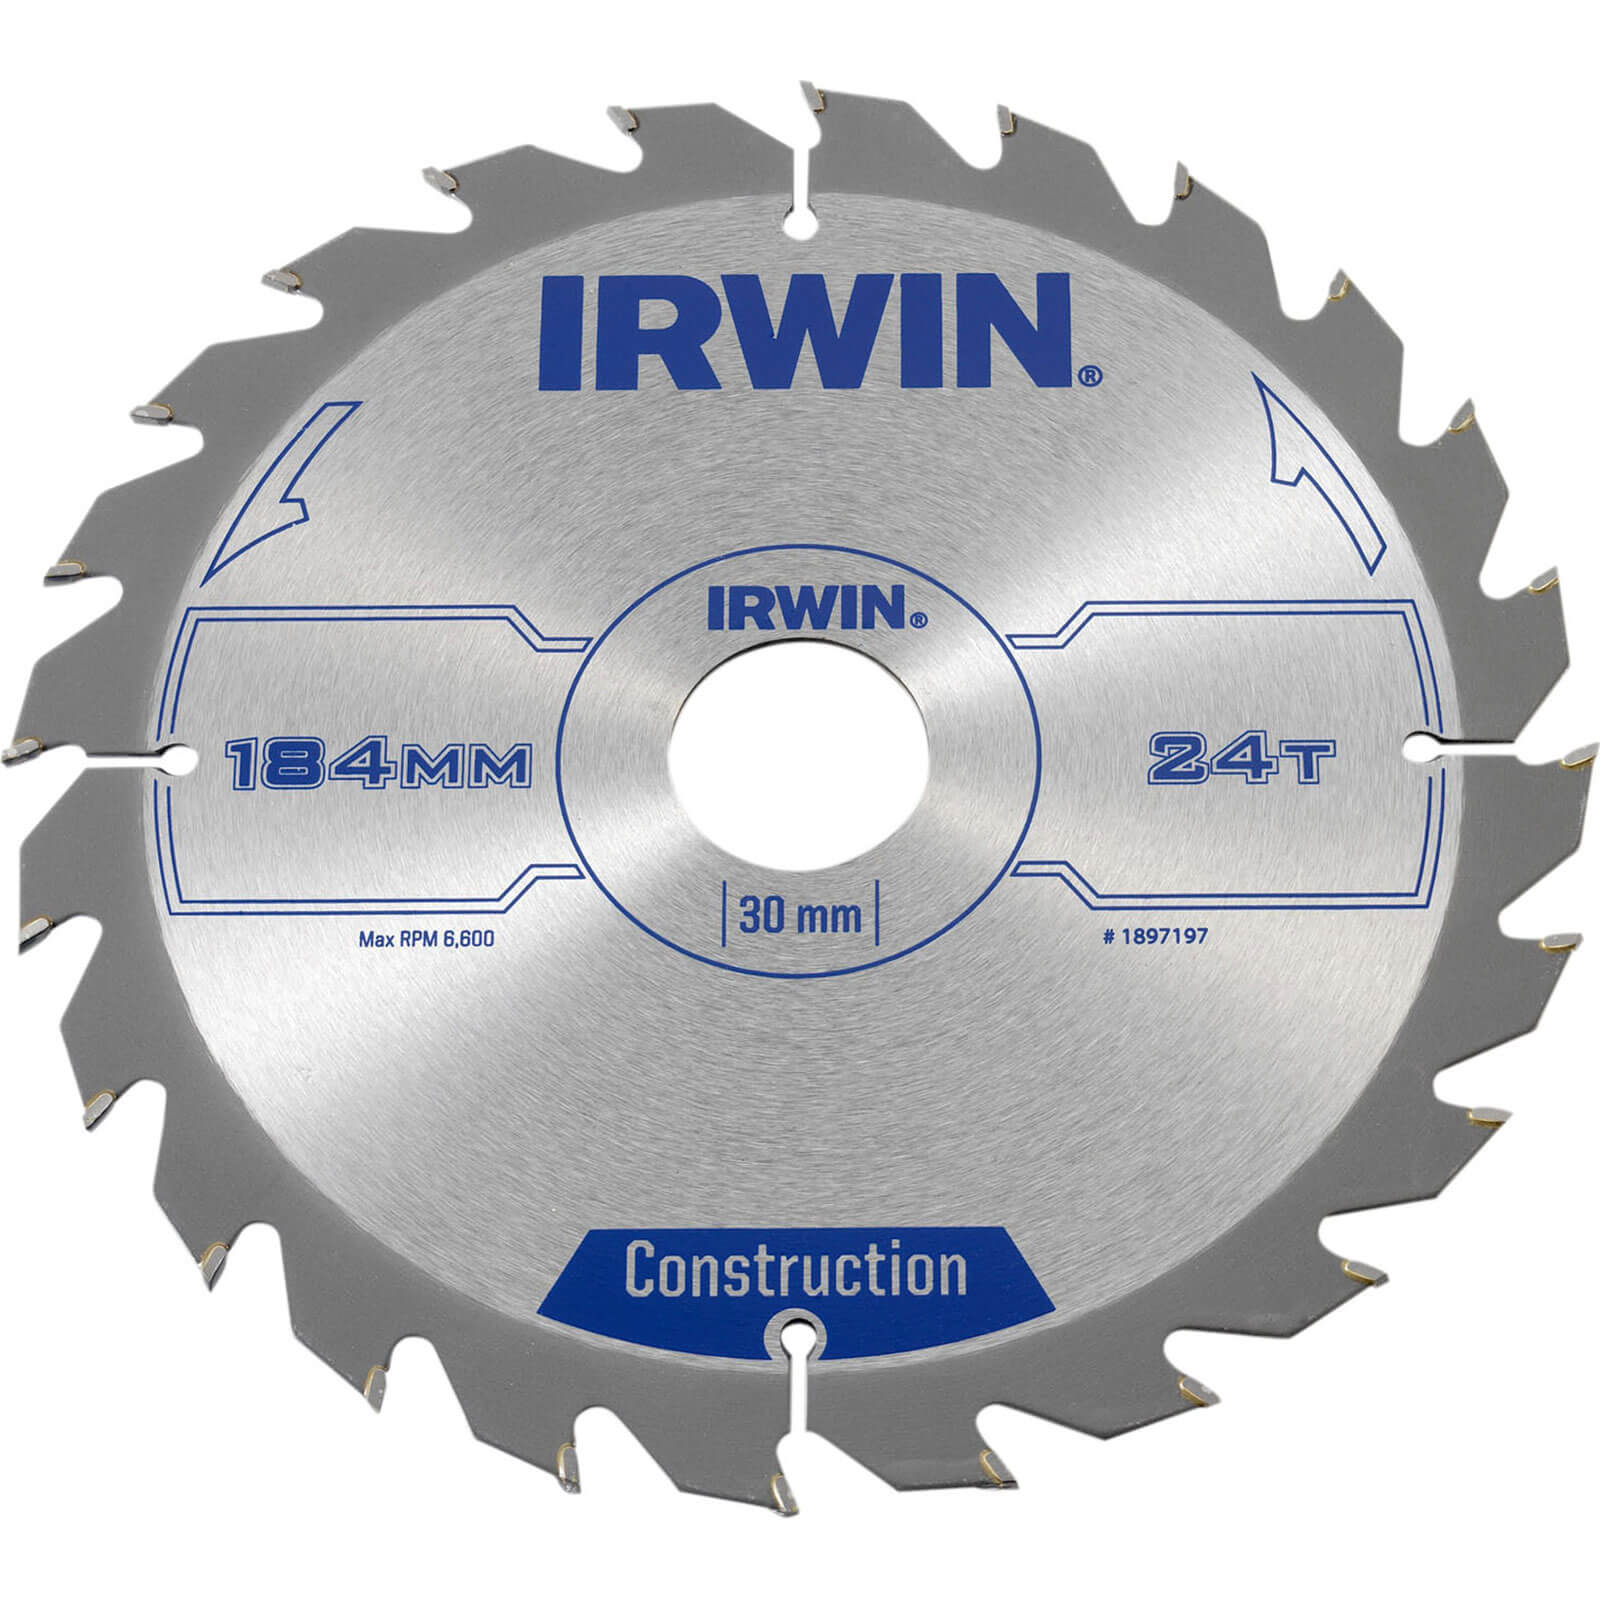 Image of Irwin ATB Construction Circular Saw Blade 184mm 24T 30mm